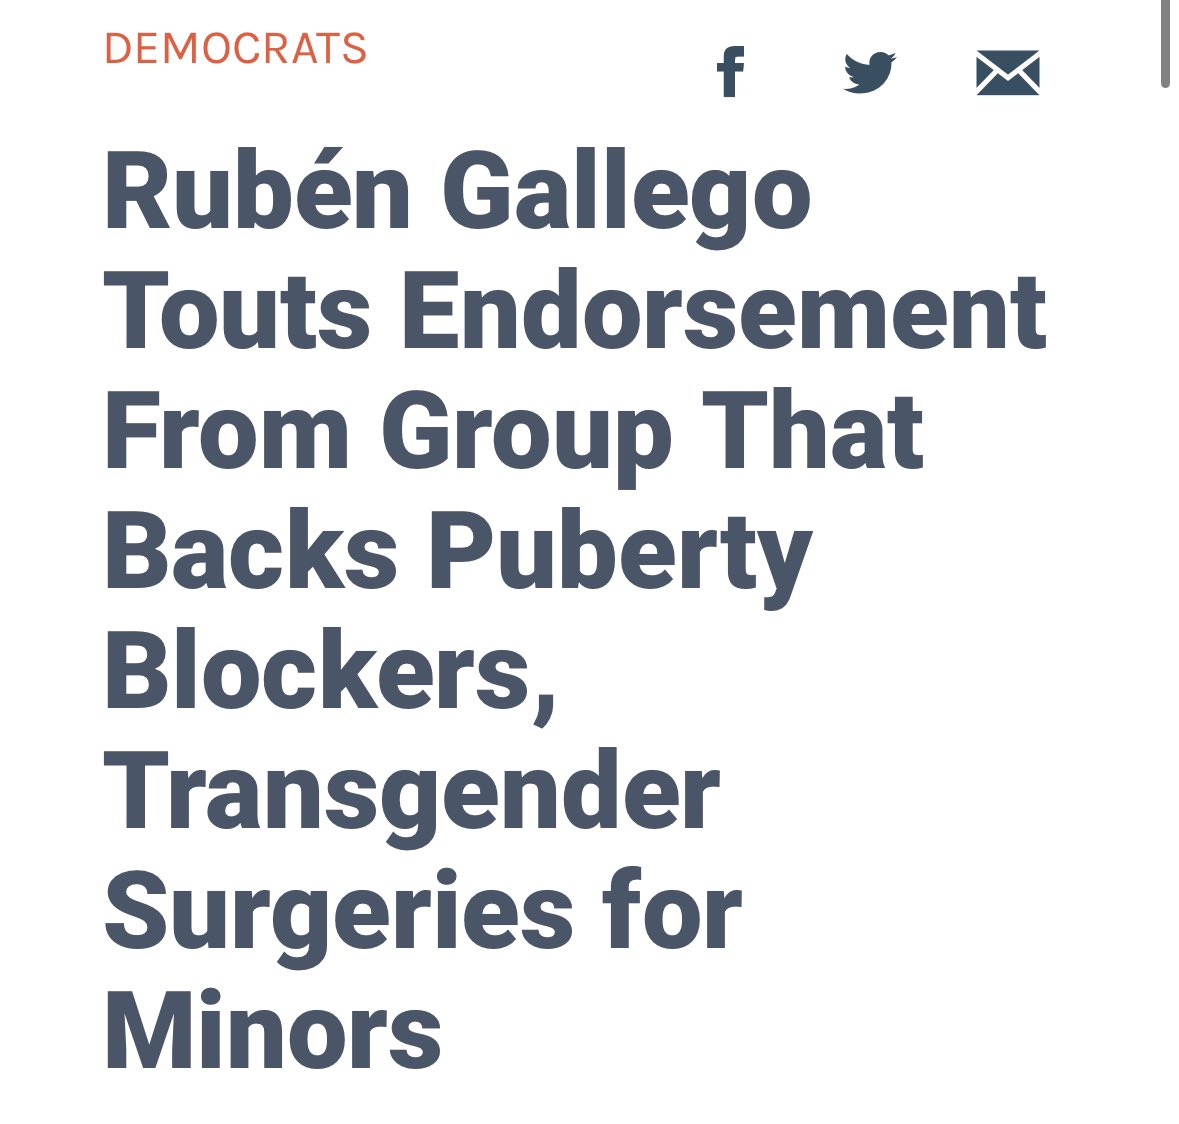 Radical Ruben “@RubenGallego, who has undergone what one newspaper called a 'moderate reinvention' during his Senate race, is touting an endorsement from a left-wing group that supports puberty blockers for children & has defended genital reconstruction surgery for kids who